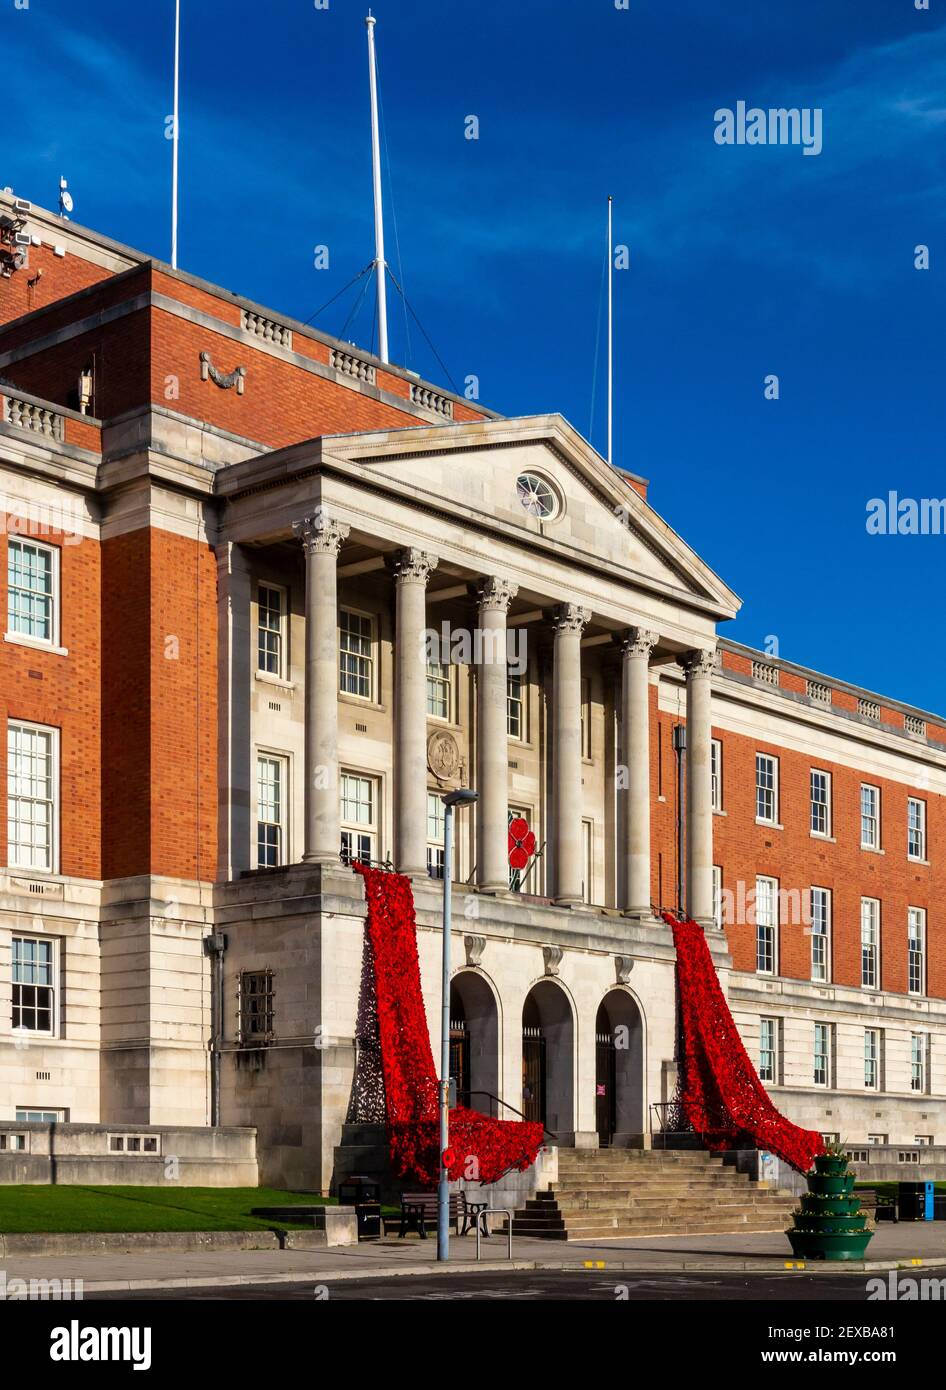 Chesterfield Town Hall Derbyshire England UK draped in red poppies for Remembrance Day. Stock Photo